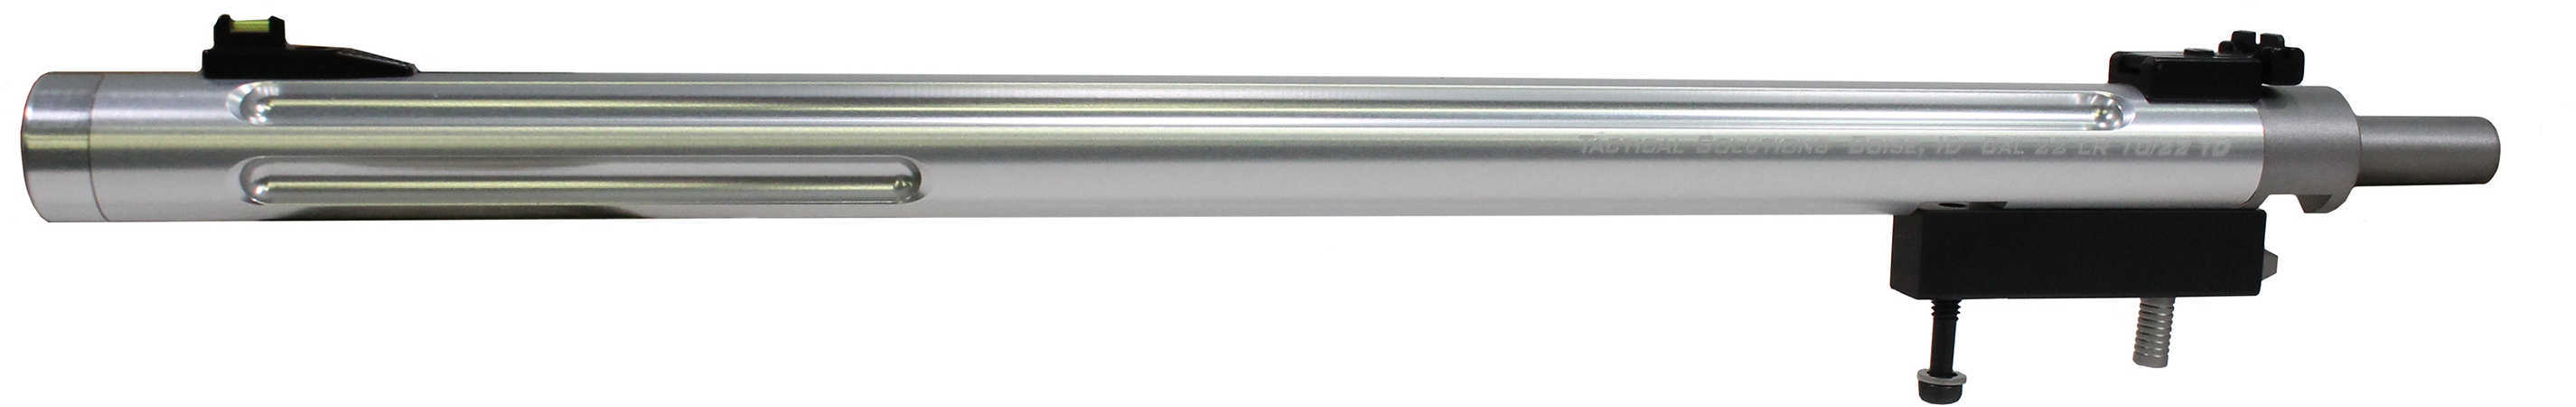 Tactical Solutions 10/22 Takedown Bull Barrel Silver Md: 1022TD-SIL